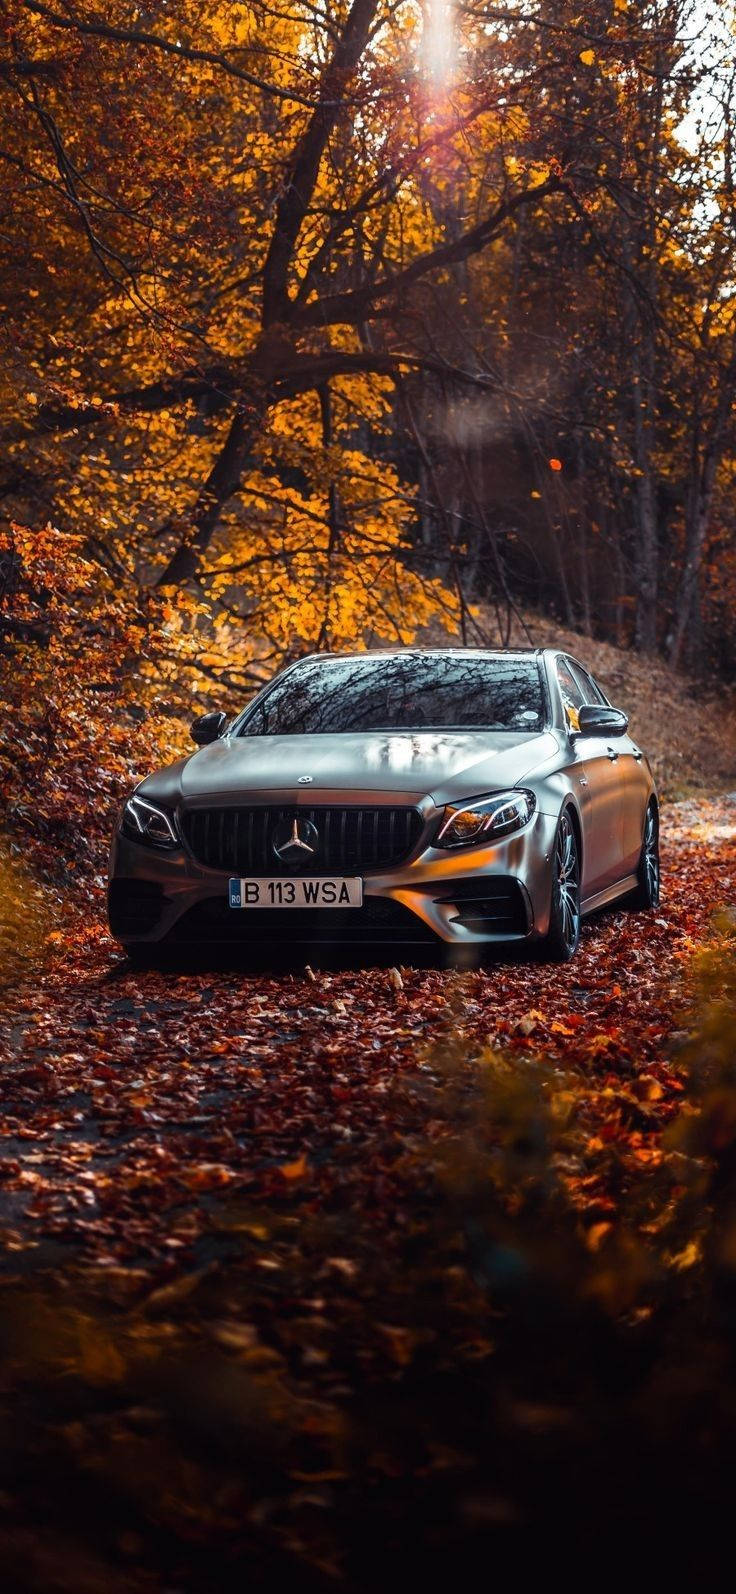 Luxurious Drive with Mercedes in Autumn - iPhone X Wallpaper Wallpaper